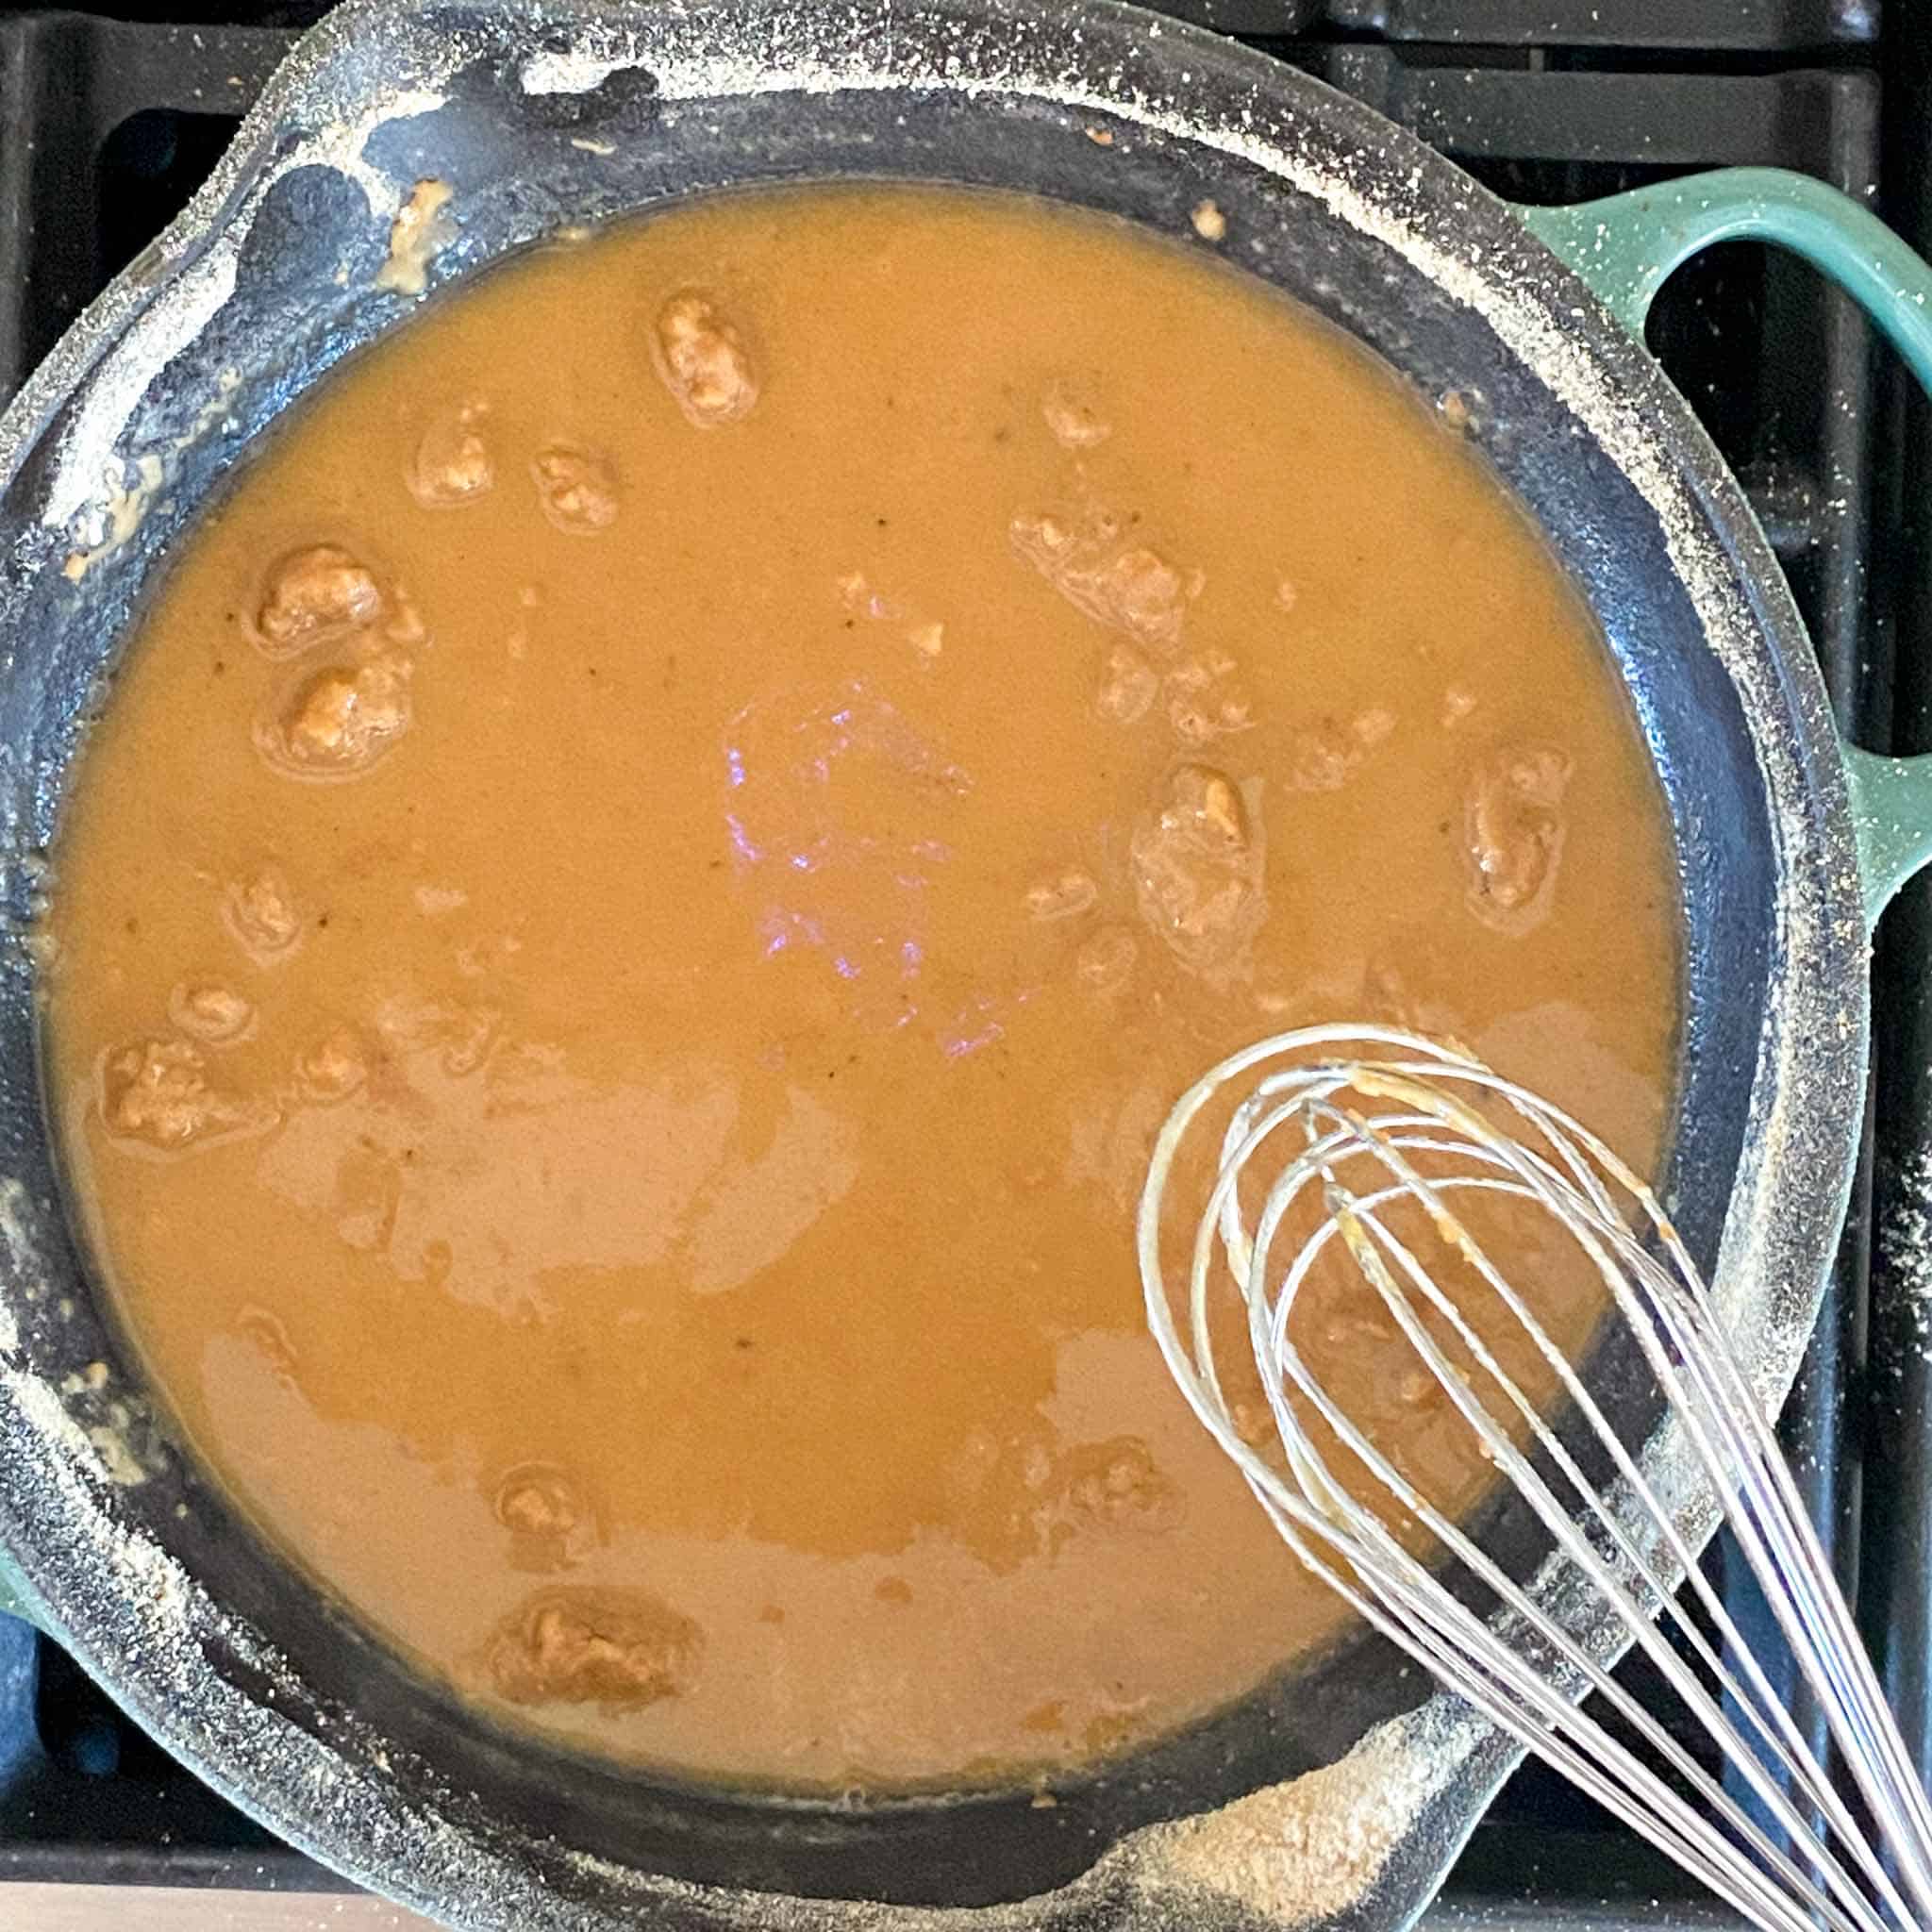 Roux forming in a cast iron pan being whisked.